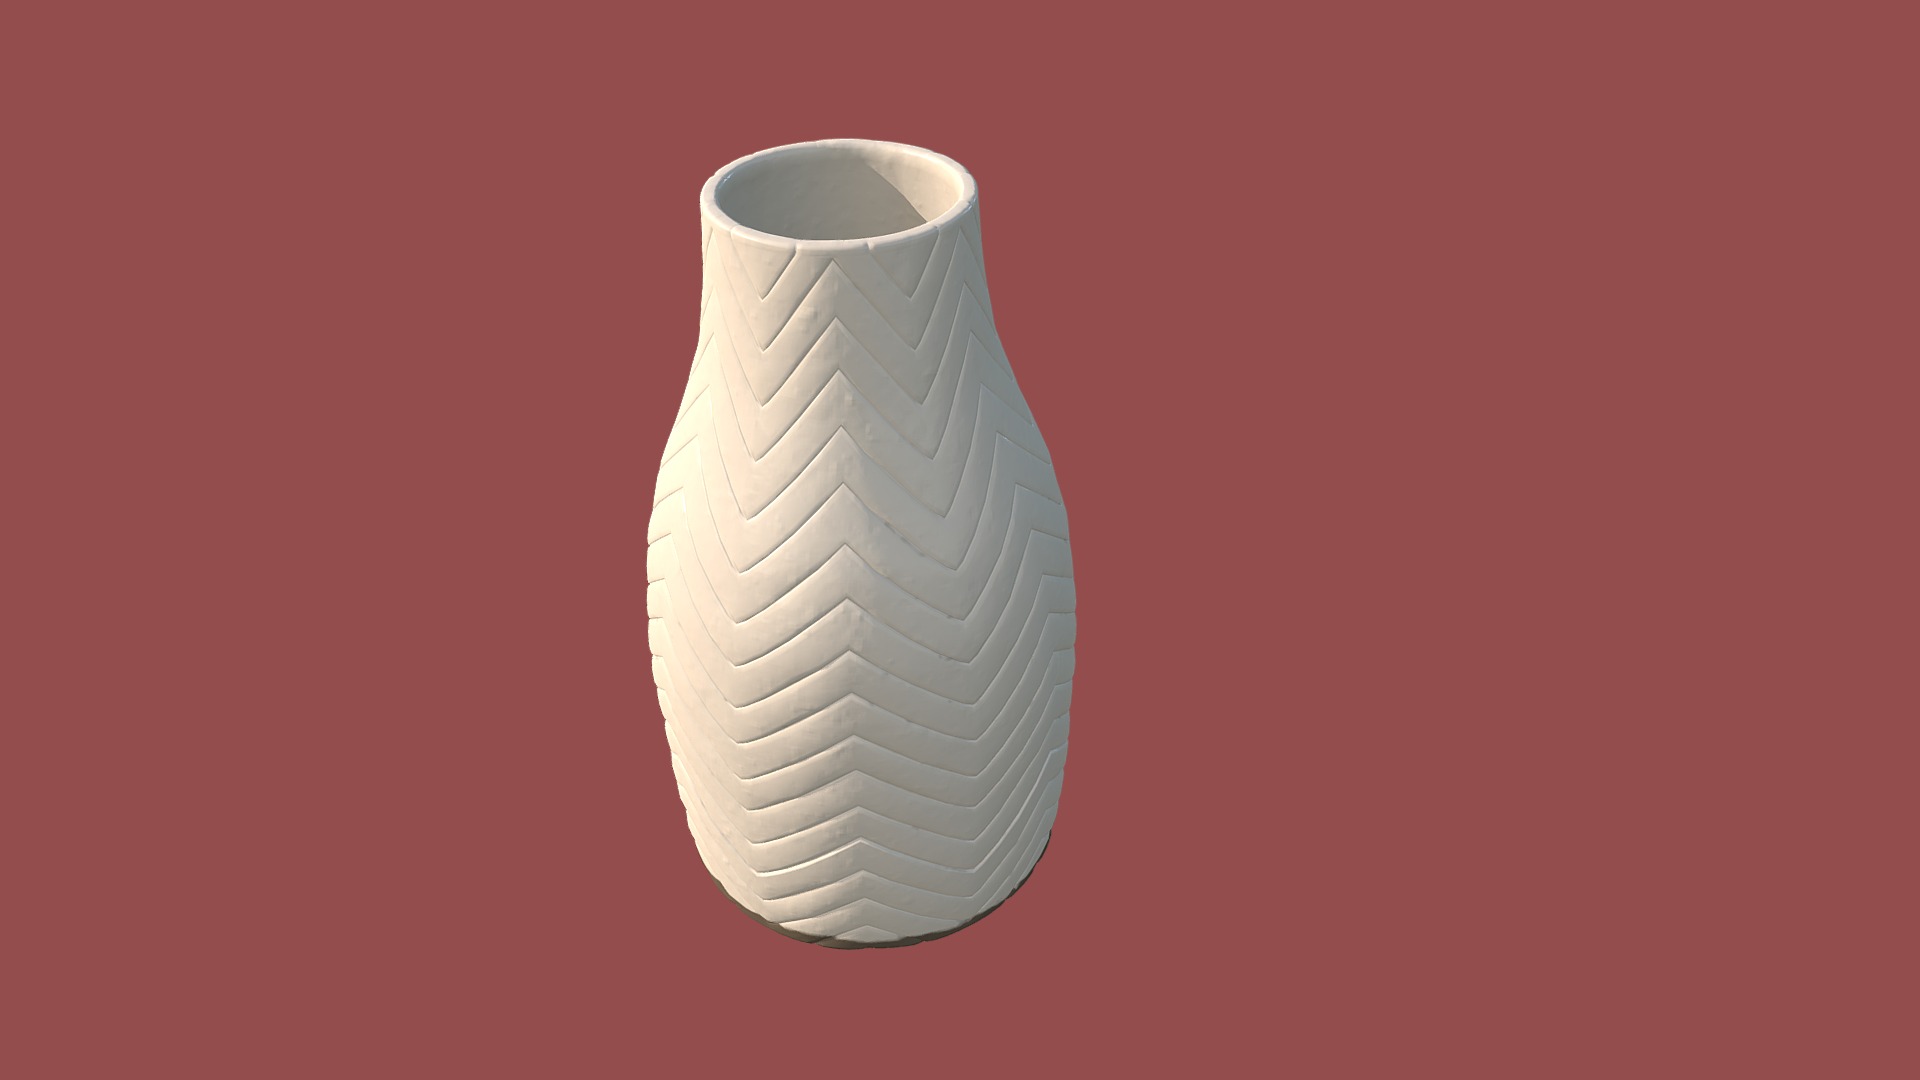 3D model Vase Laura - This is a 3D model of the Vase Laura. The 3D model is about a white cylindrical object.